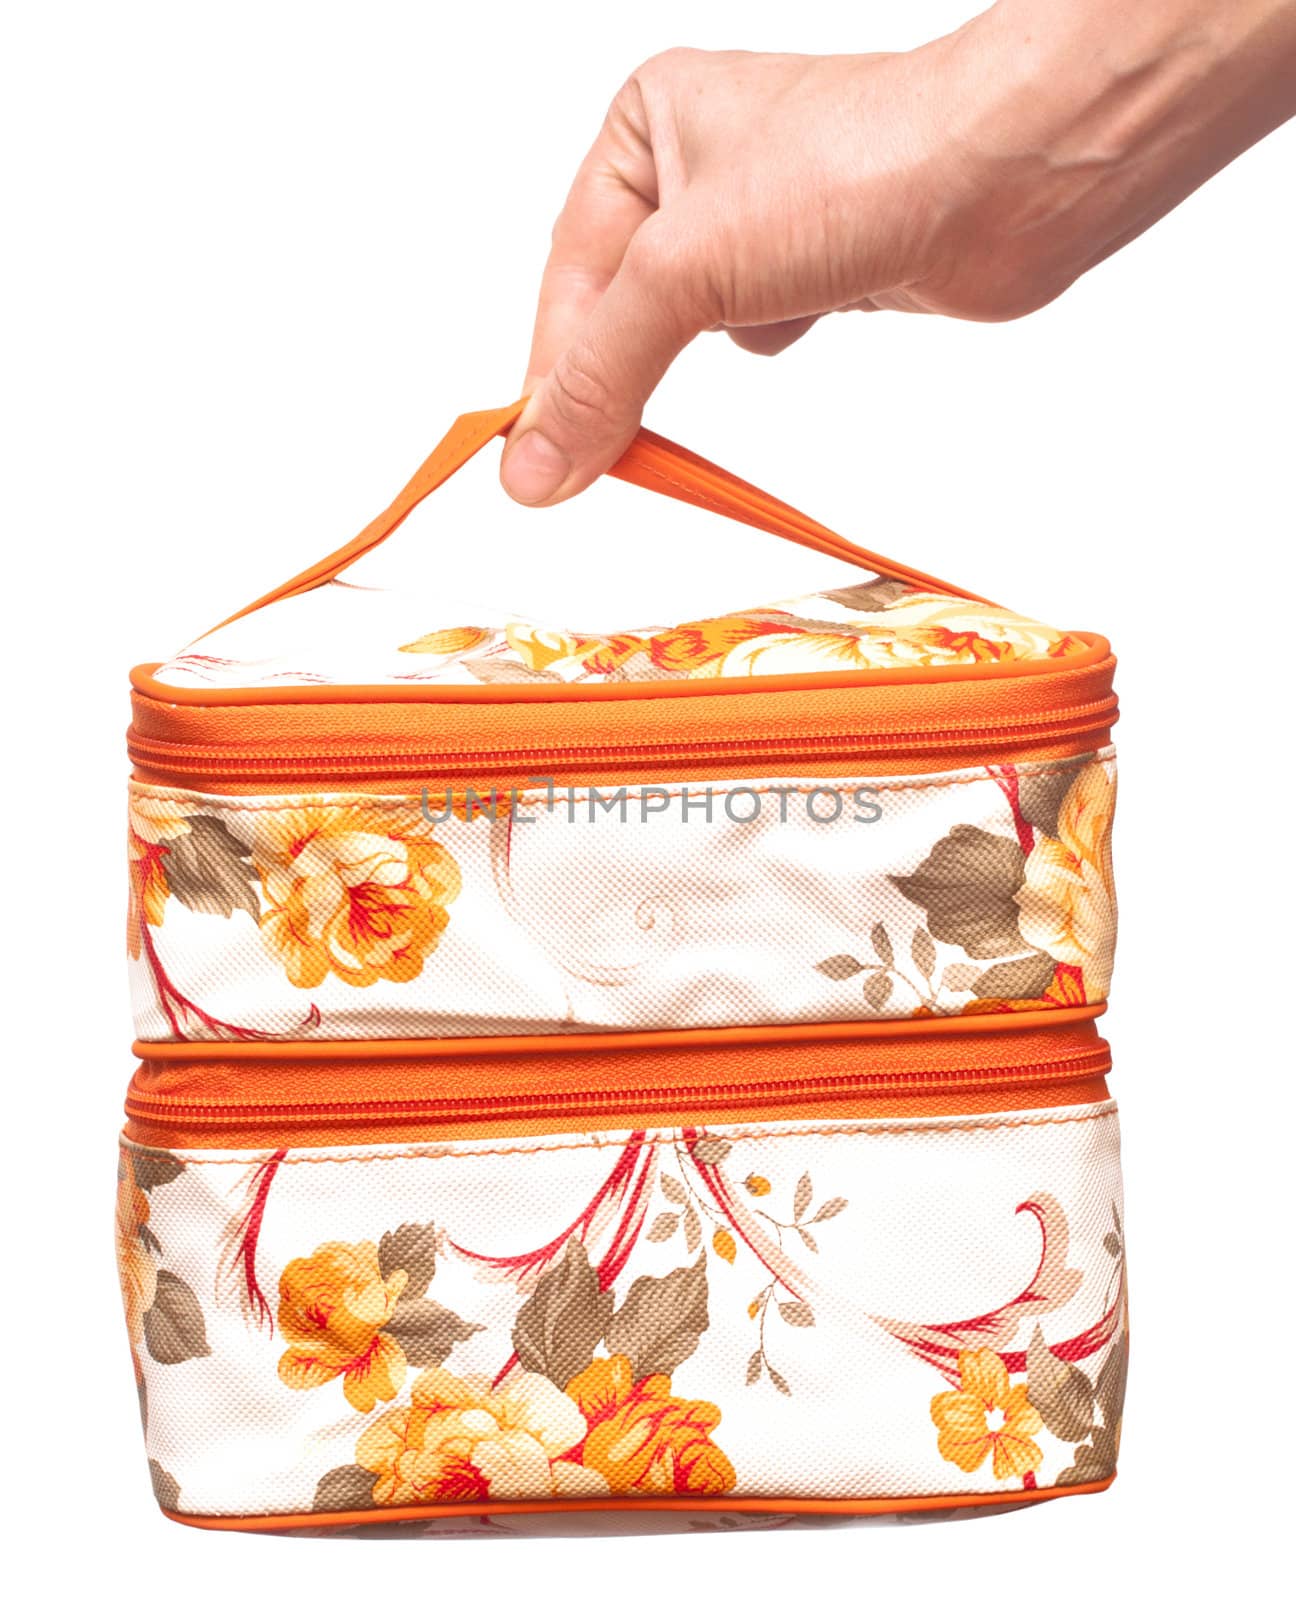 cosmetic bag in hand is isolated on the white